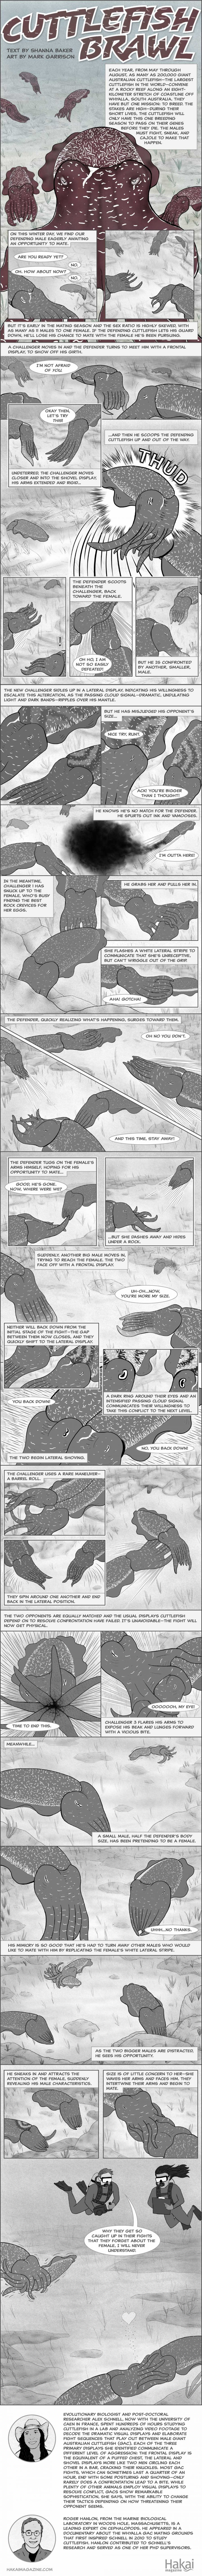 Comic depicting mating and fighting in giant Australian cuttlefish